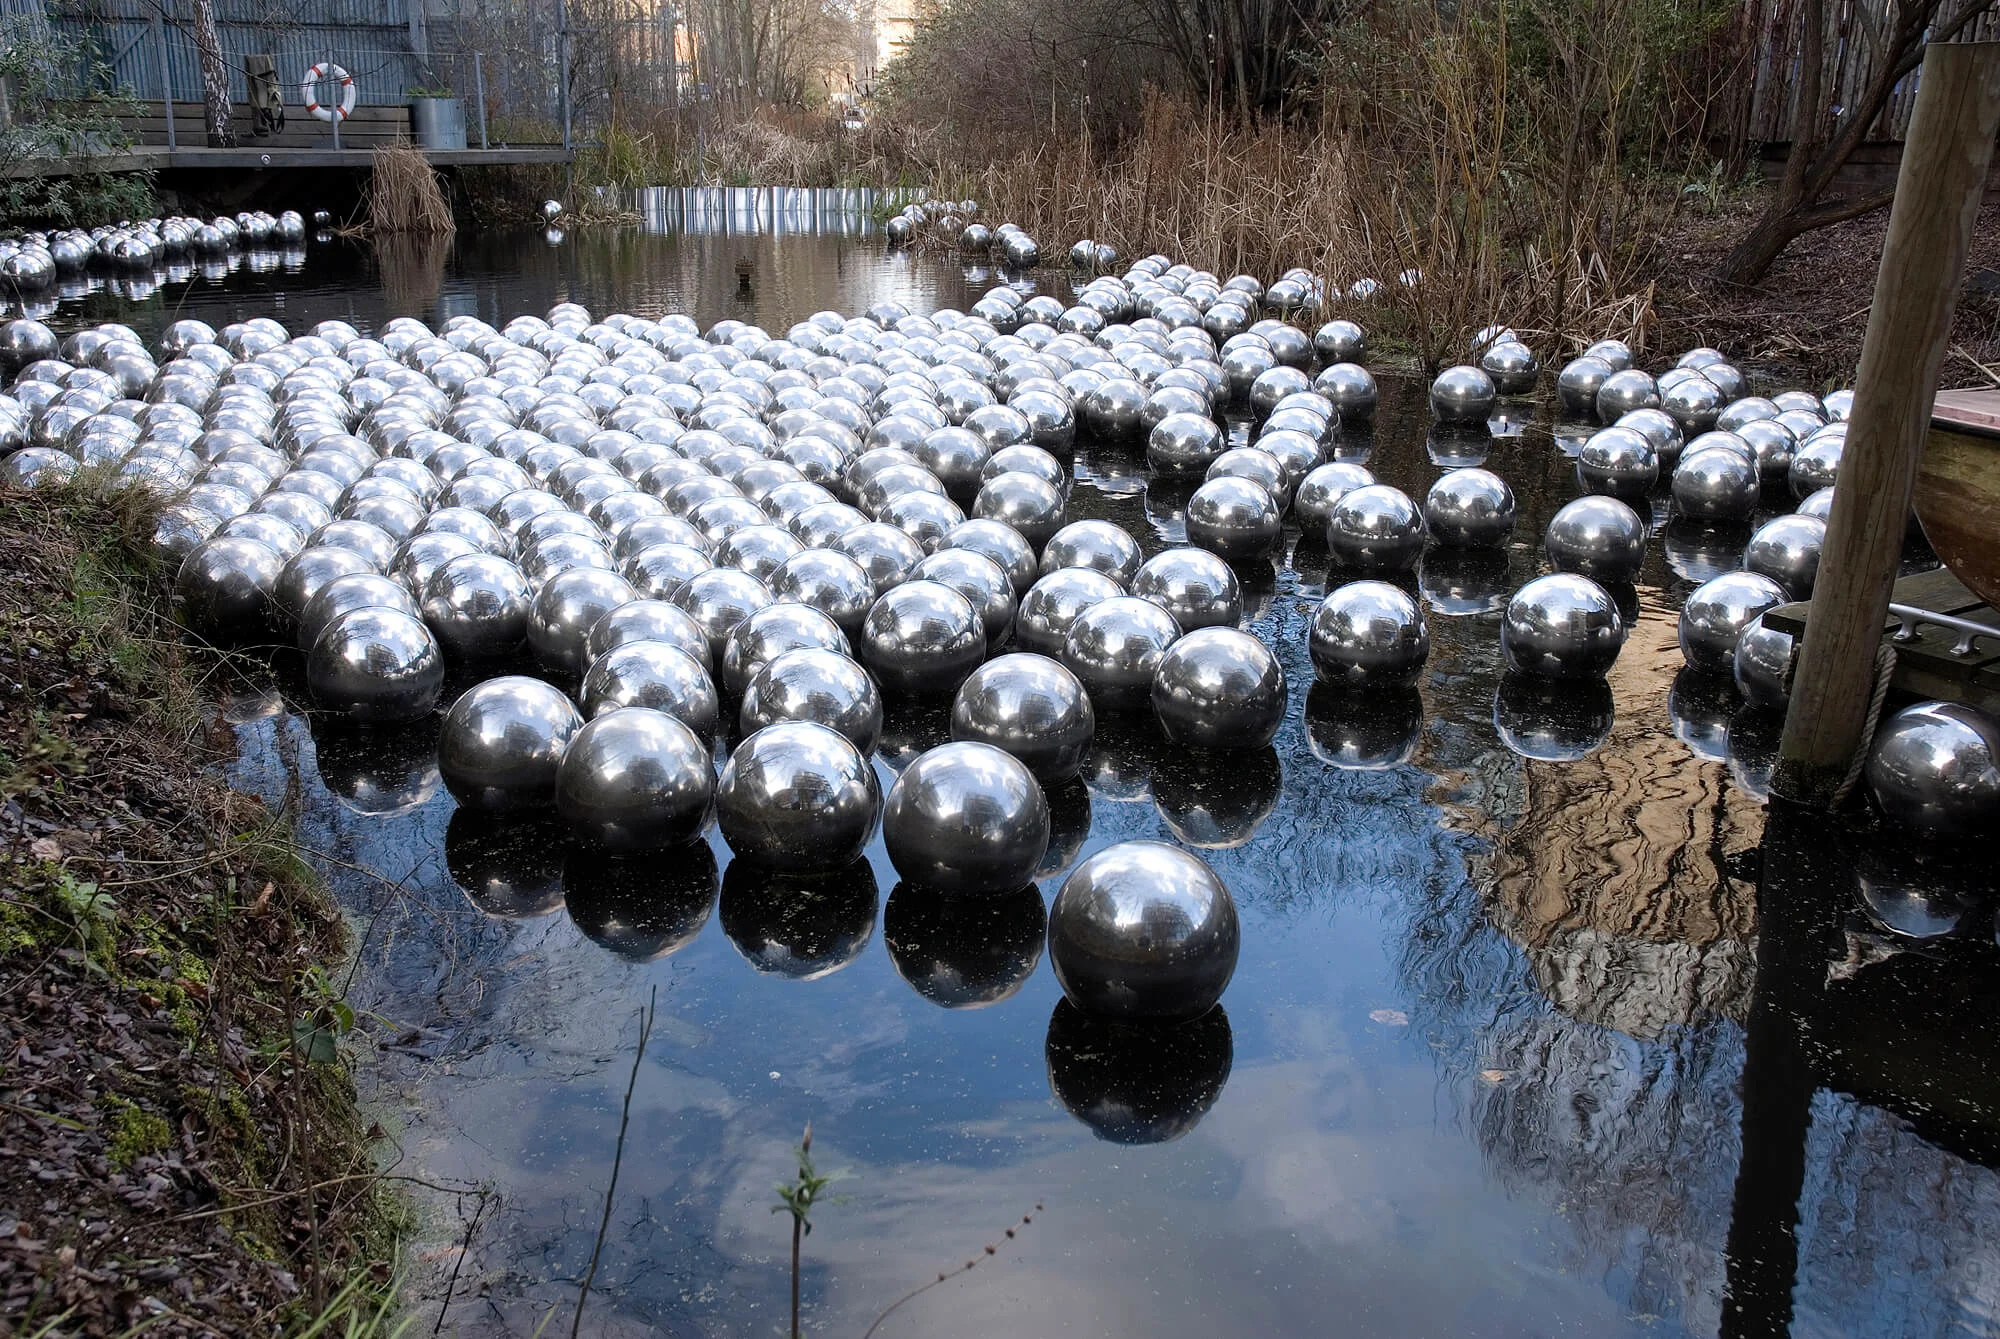 Narcissus Garden, 1966. Installation View at Victoria Miro, 2008. Stainless steel spheres, set of 800